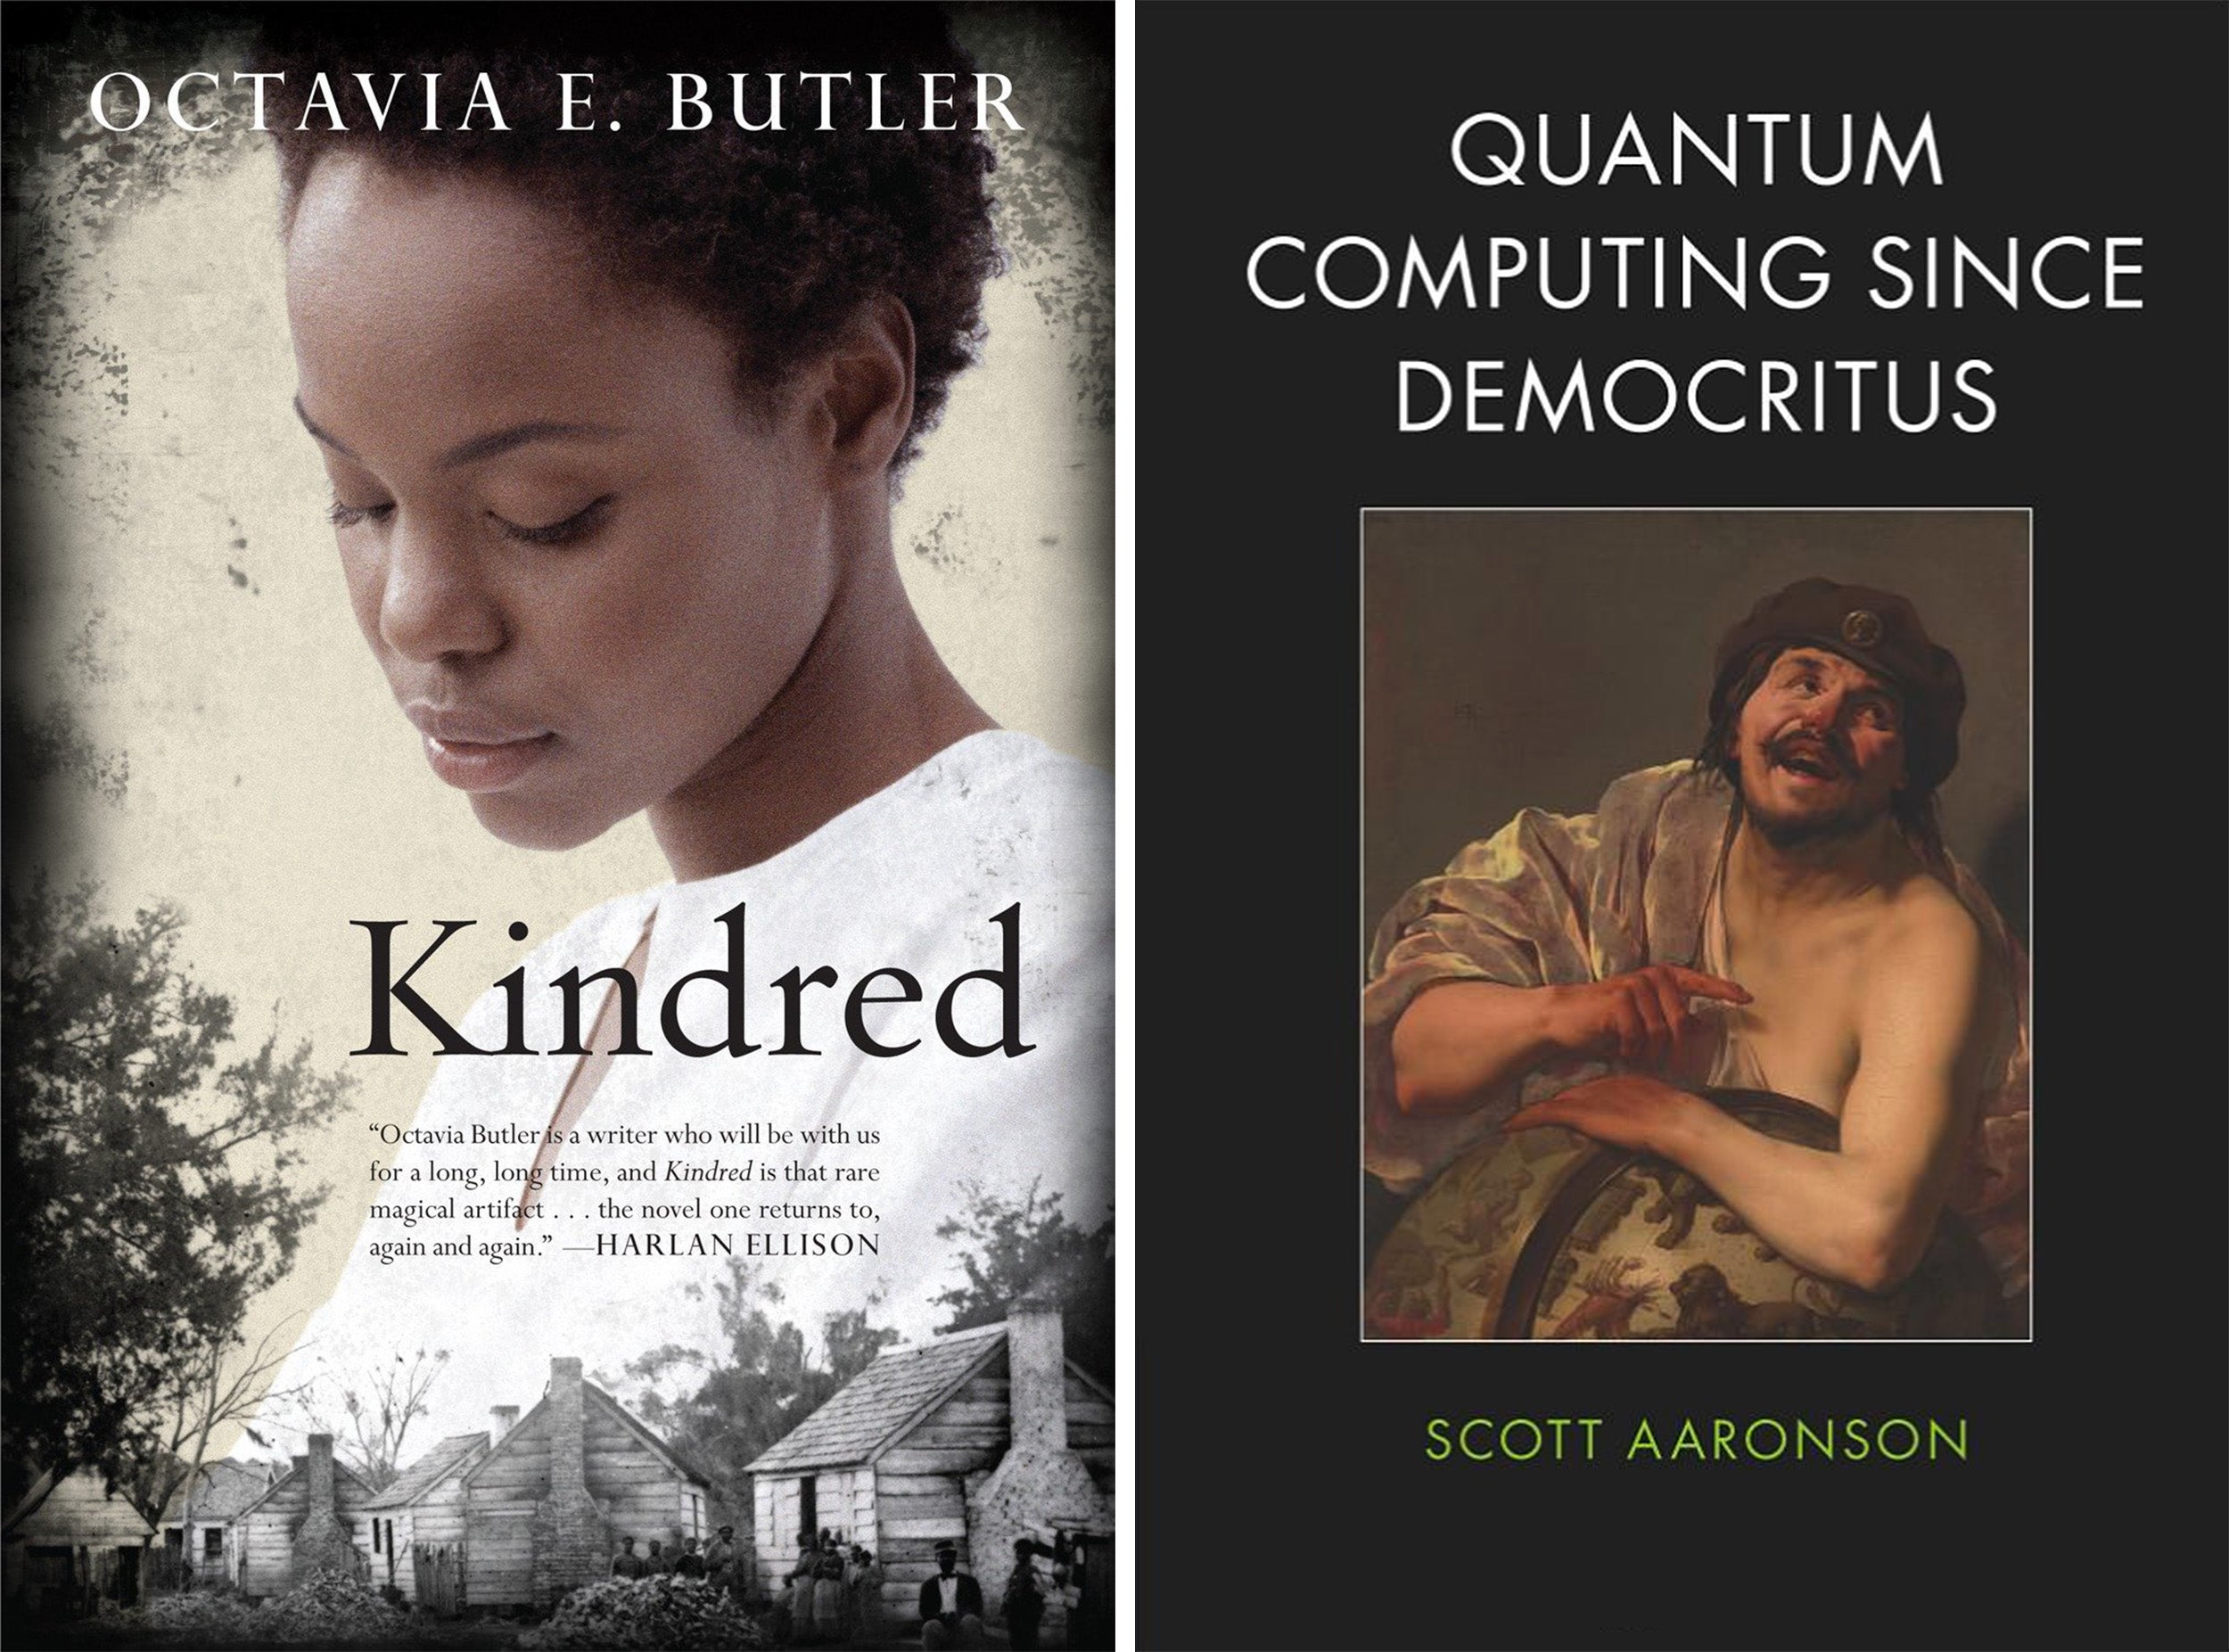 Kindred and Quantum Computing Since Democritus book covers